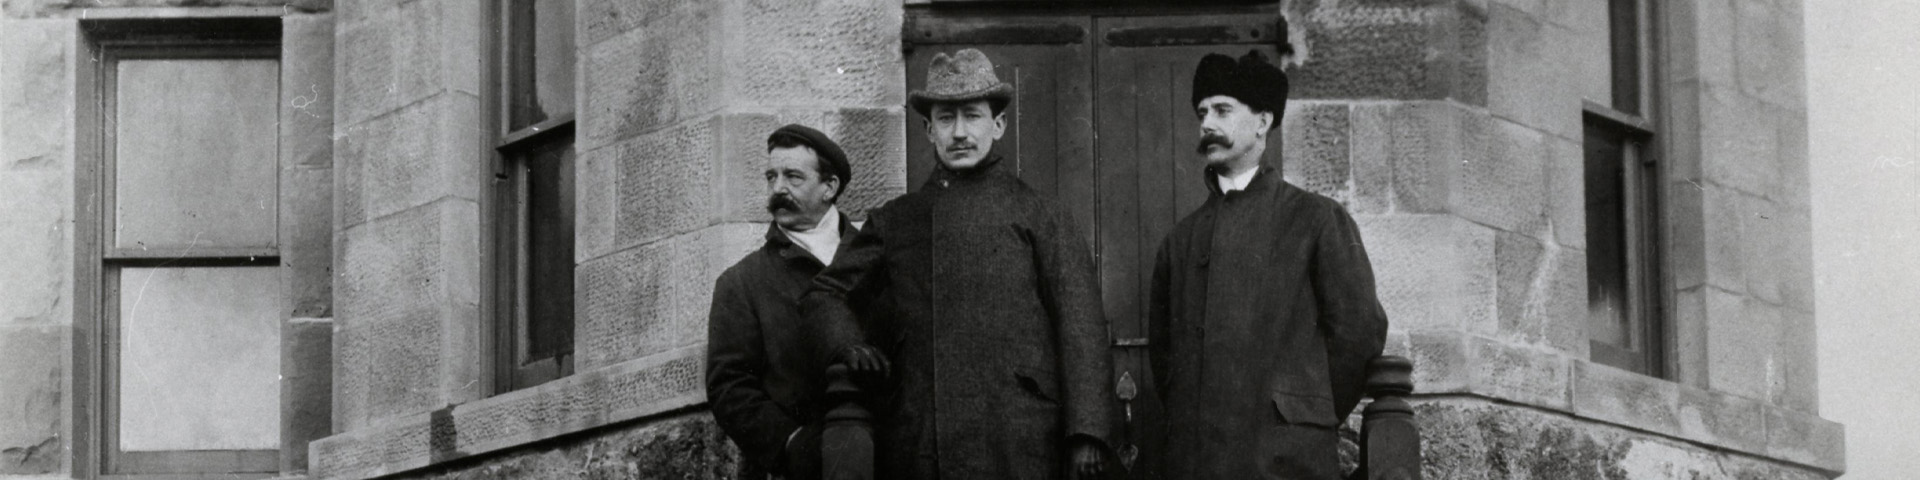 Marconi and some of his colleagues standing at the entrance to Cabot Tower